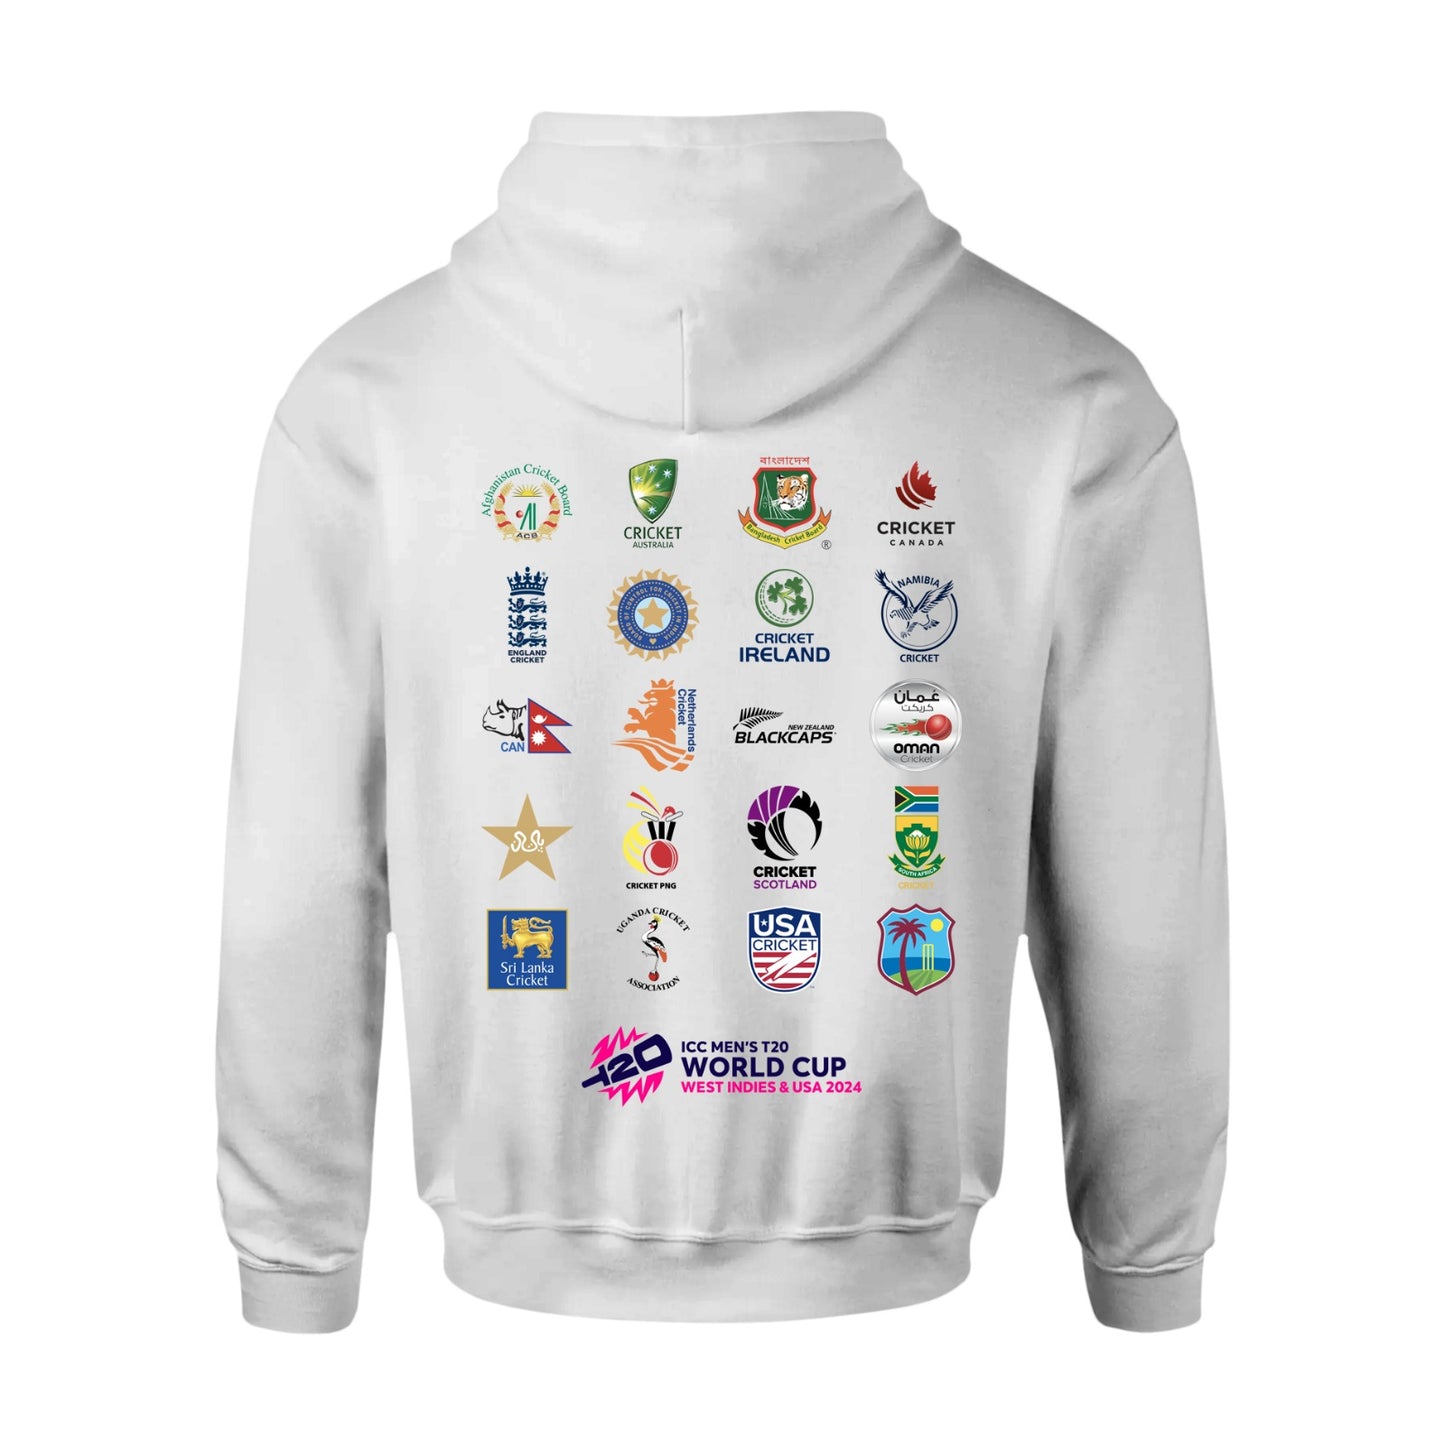 ICC T20 World Cup All Nations White Pullover Hoodie - West Indies & USA 2024 Edition